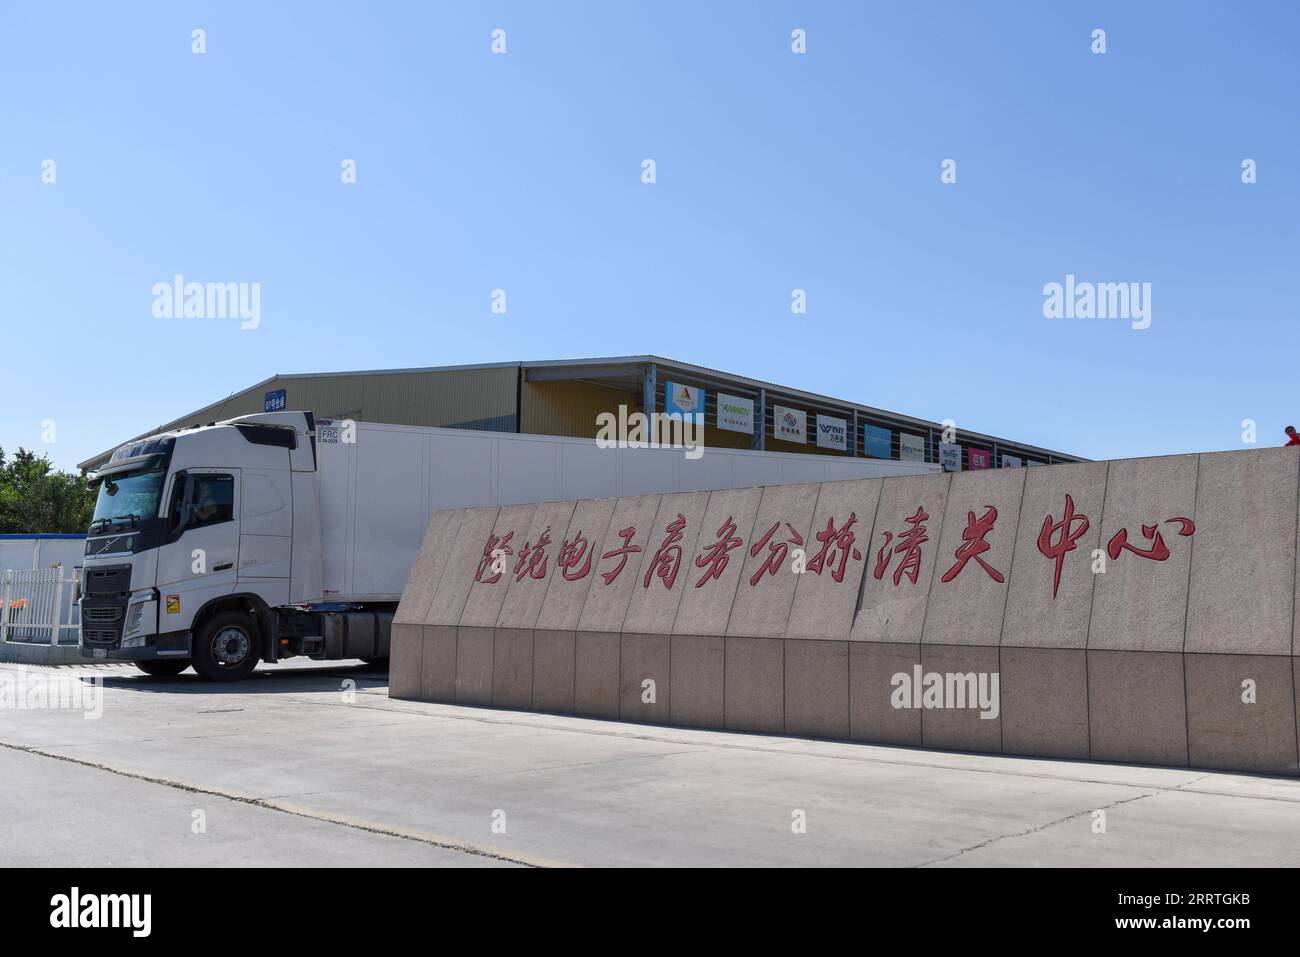 230725 -- ALATAW PASS, July 25, 2023 -- A loaded cargo truck drives out of the custom clearance center for the cross-border e-commerce of the Alataw Pass comprehensive bonded area in northwest China s Xinjiang Uygur Autonomous Region, July 24, 2023. In recent years, various measures have been taken to create a better business environment for cross-border e-commerce enterprises in Alataw Pass. The cross-border e-commerce business was launched in the inland port in northwest China s Xinjiang Uygur Autonomous Region in January 2020. In the first half of this year, more than 14.50 million cross-bo Stock Photo